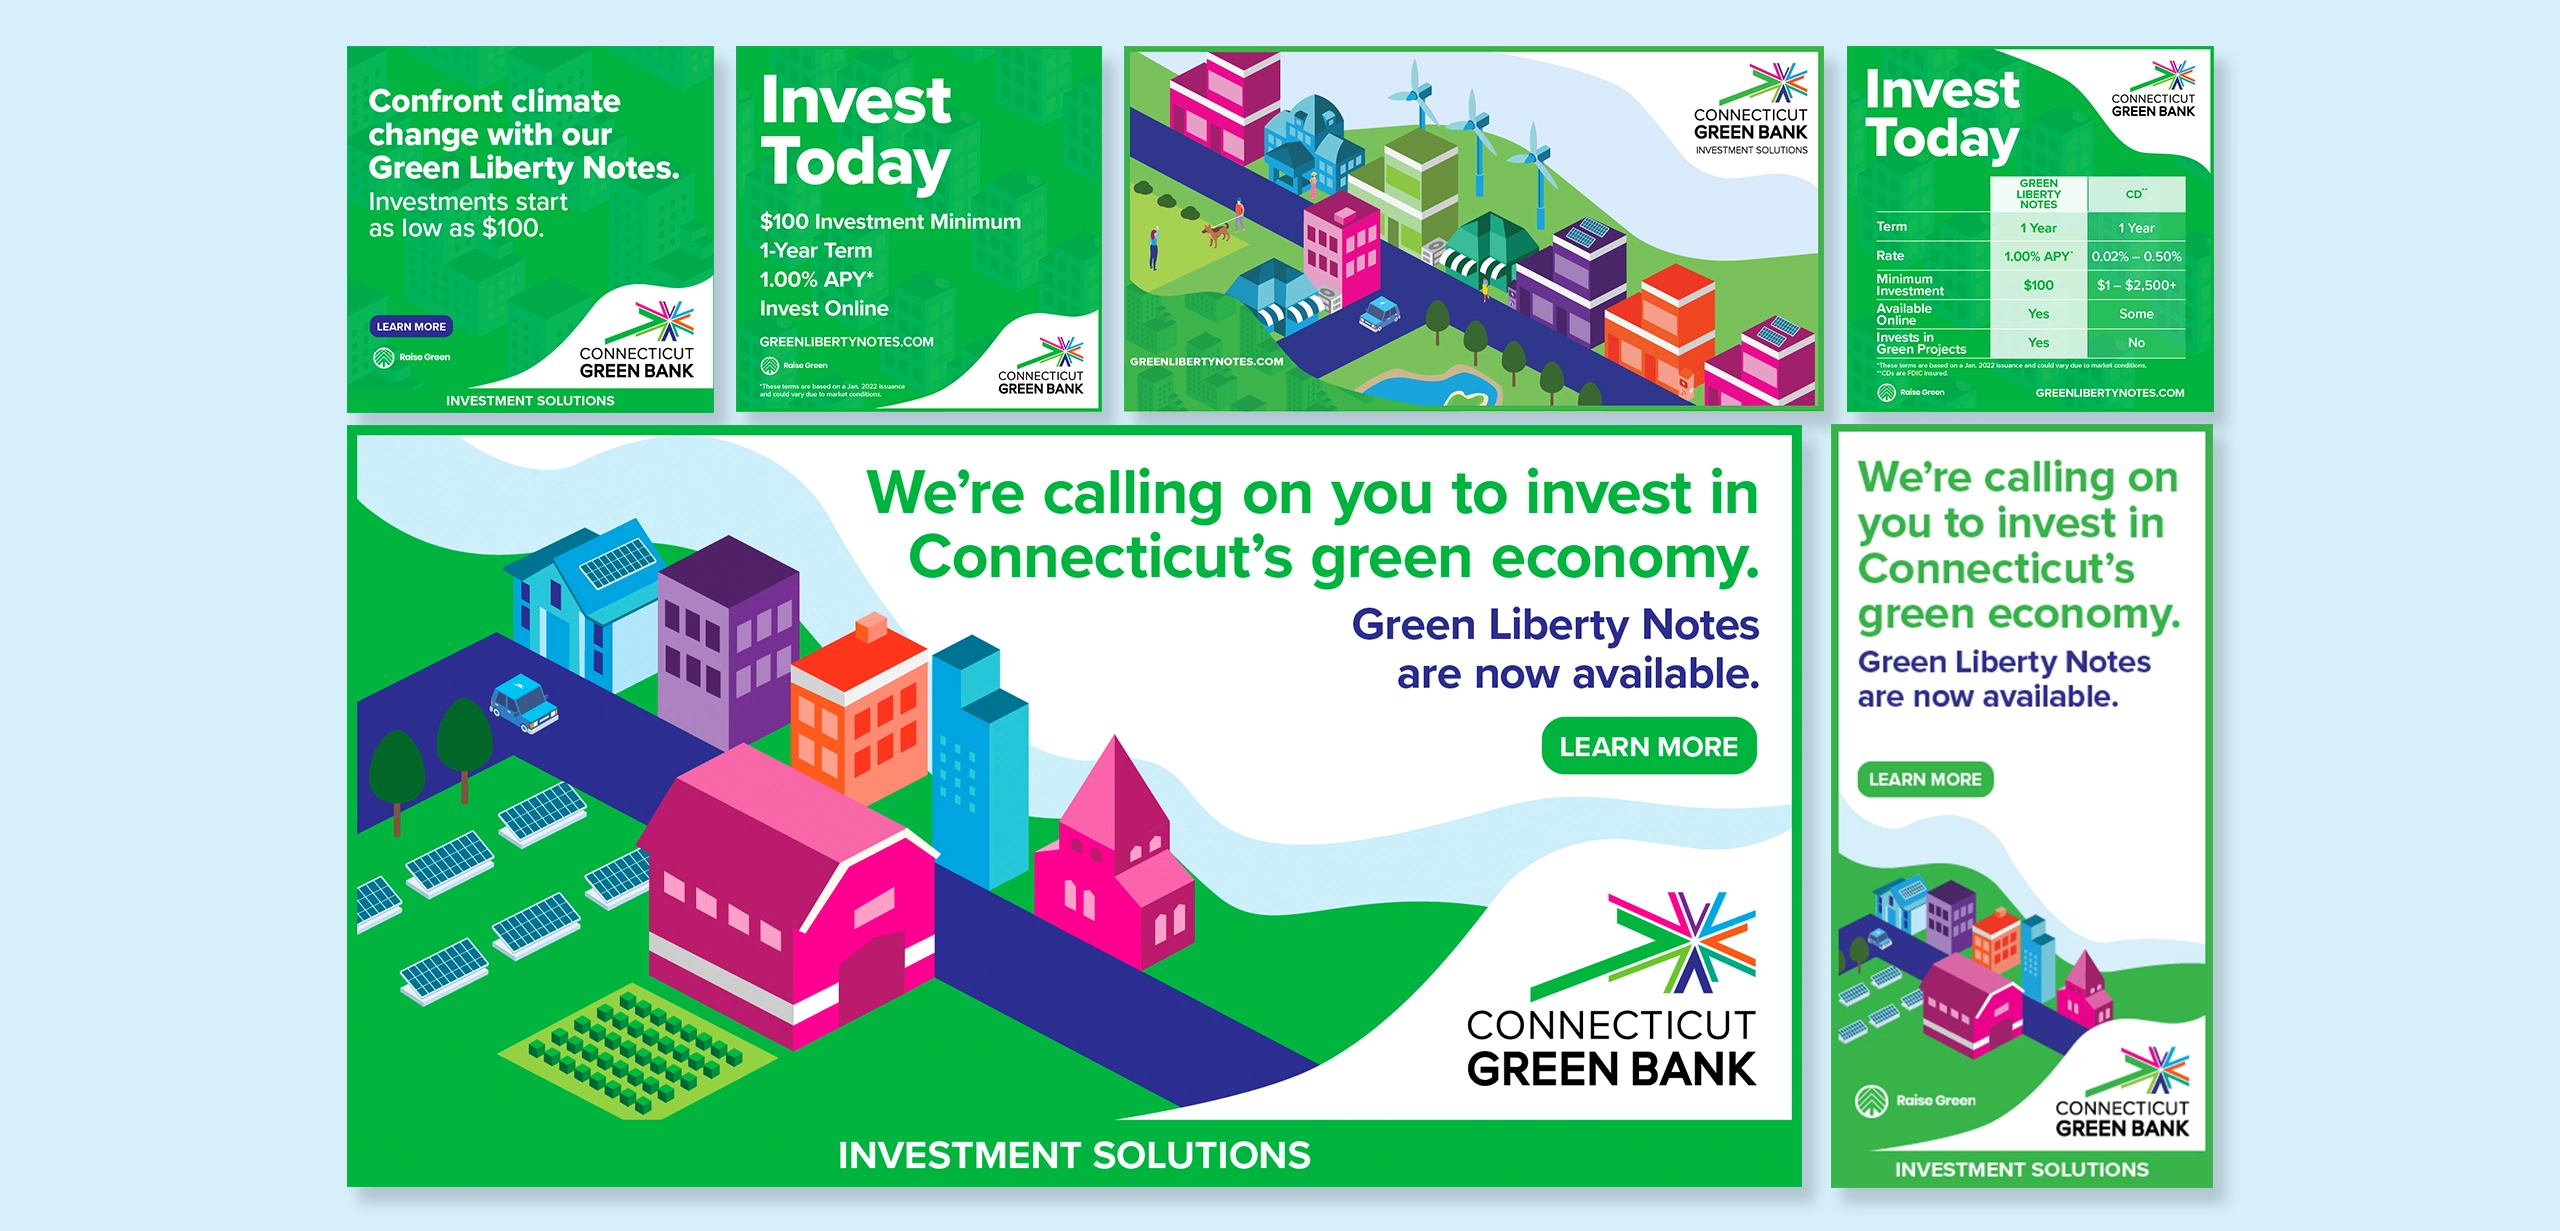 Digital Banner ad campaign for regional clean energy improvement funding company targeting investors